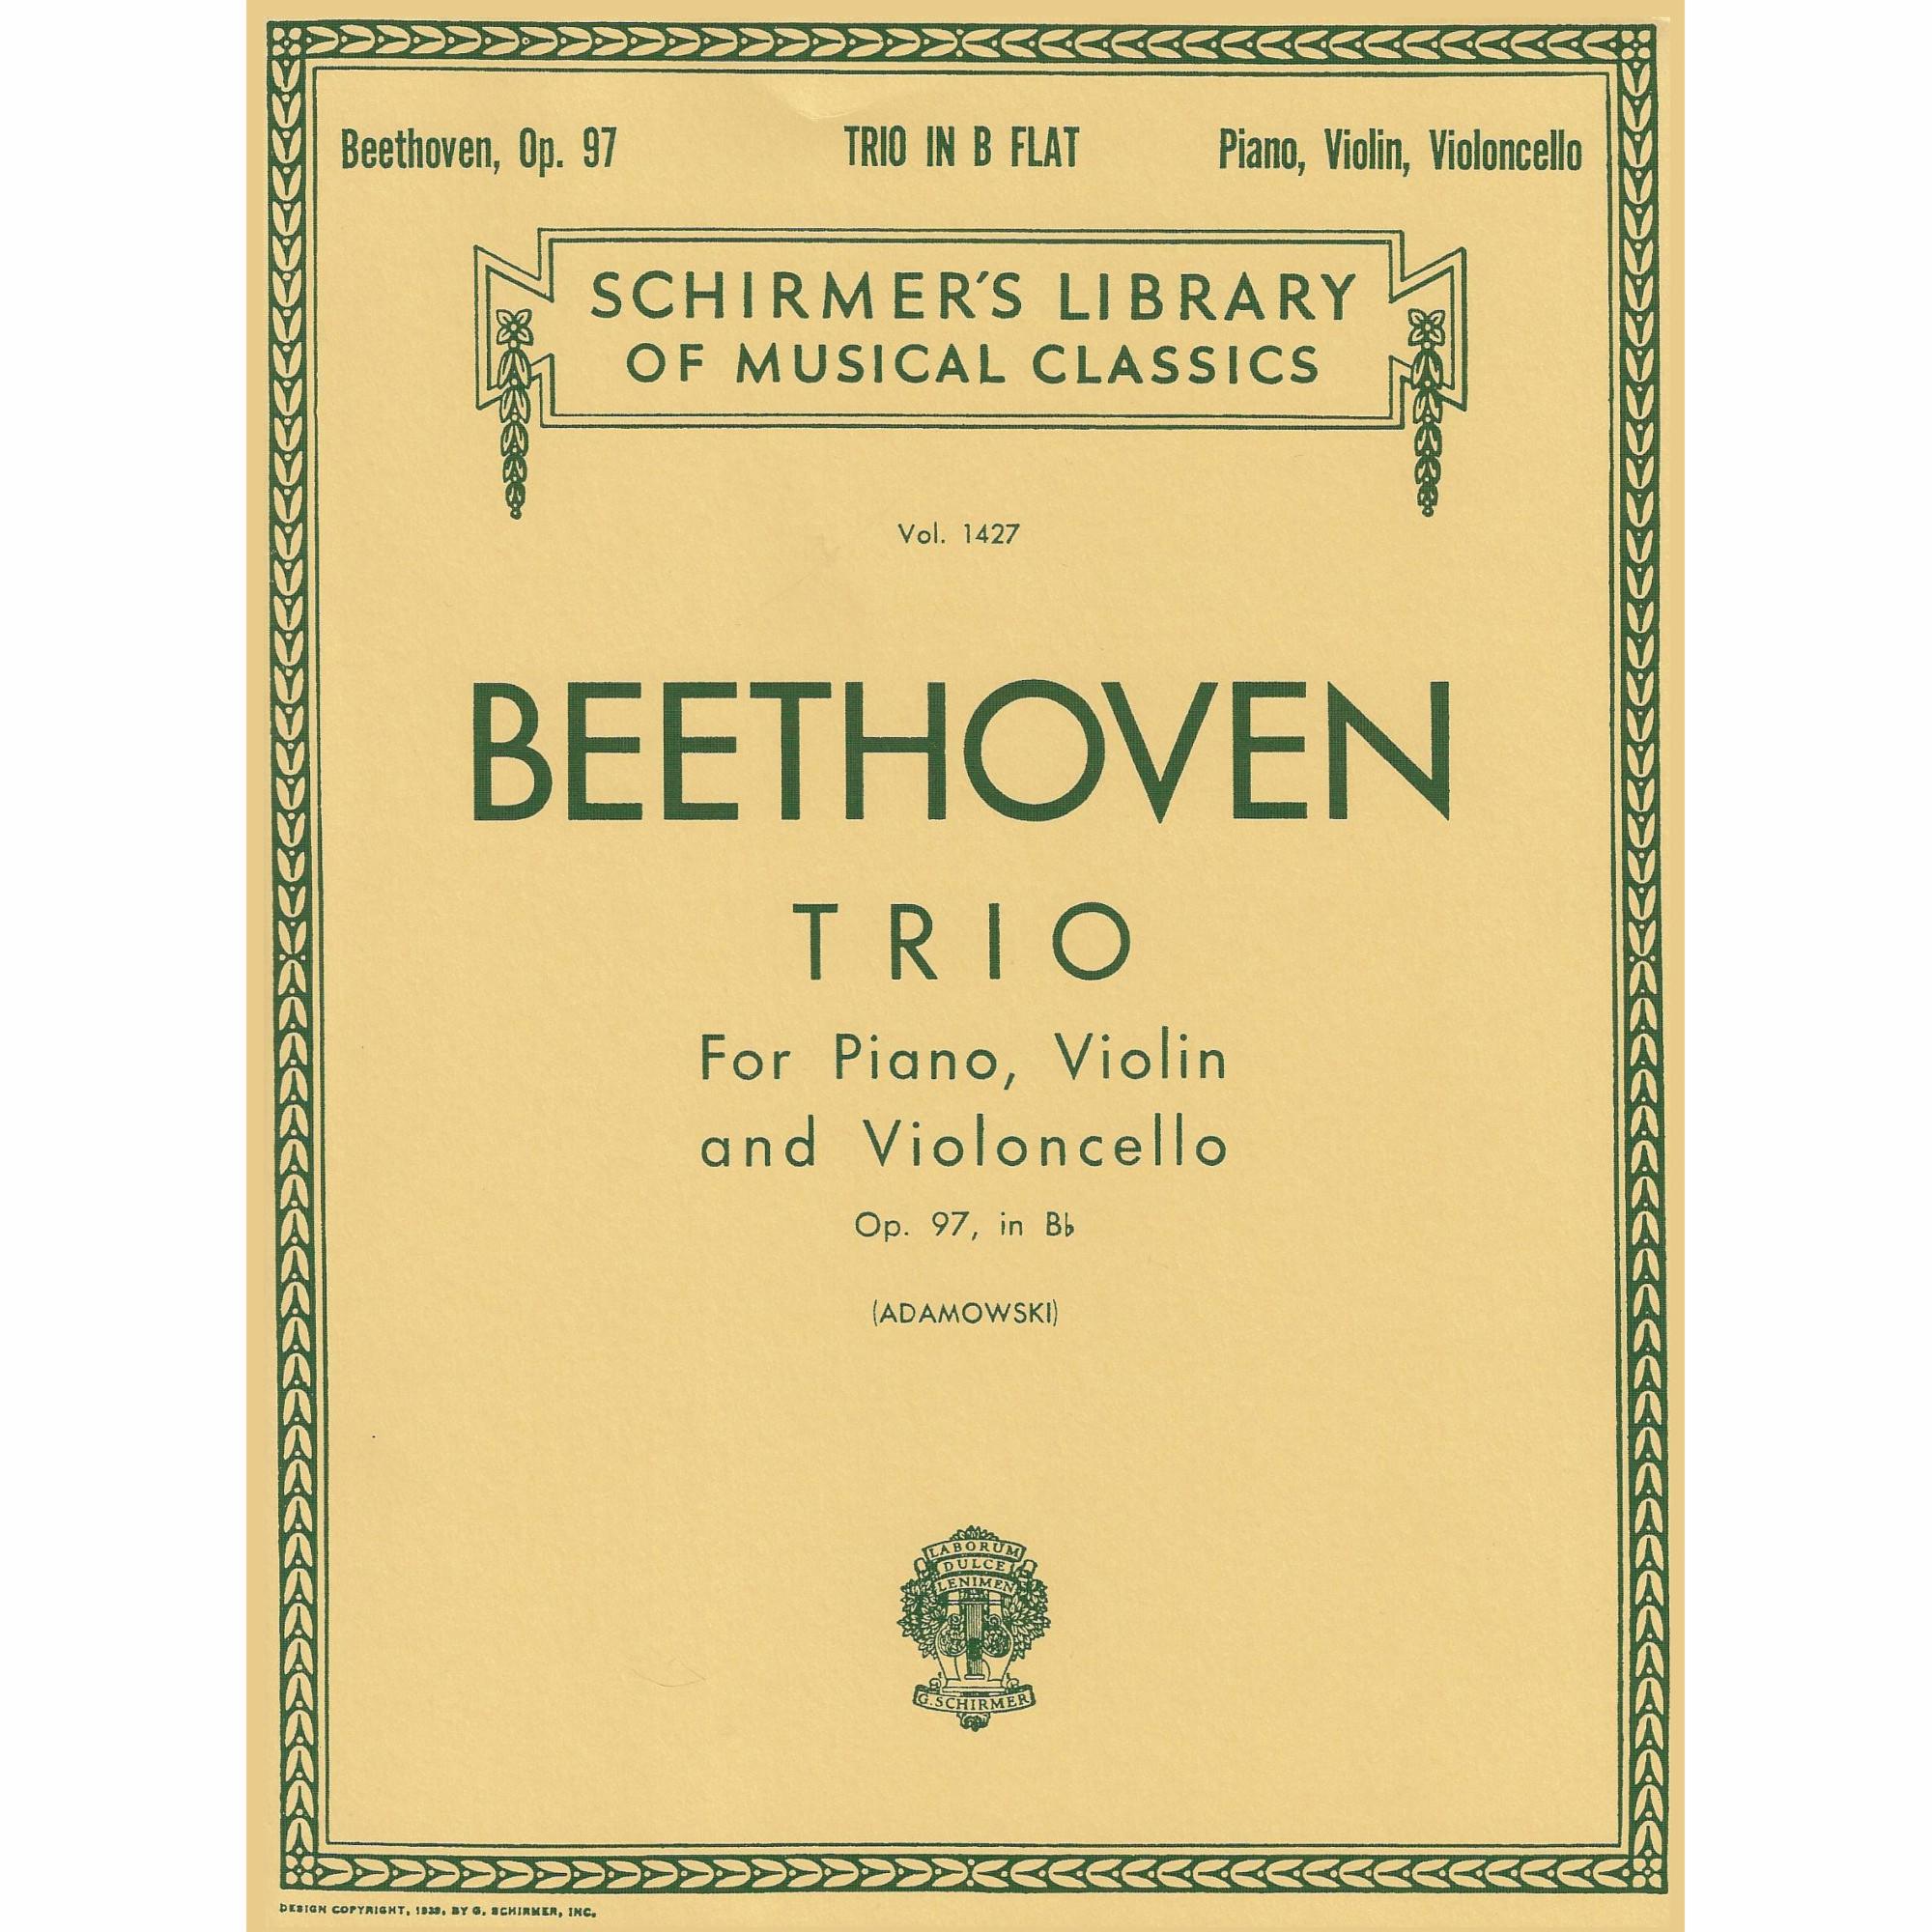 Beethoven -- Piano Trio in B-flat Major, Op. 97 (Archduke)